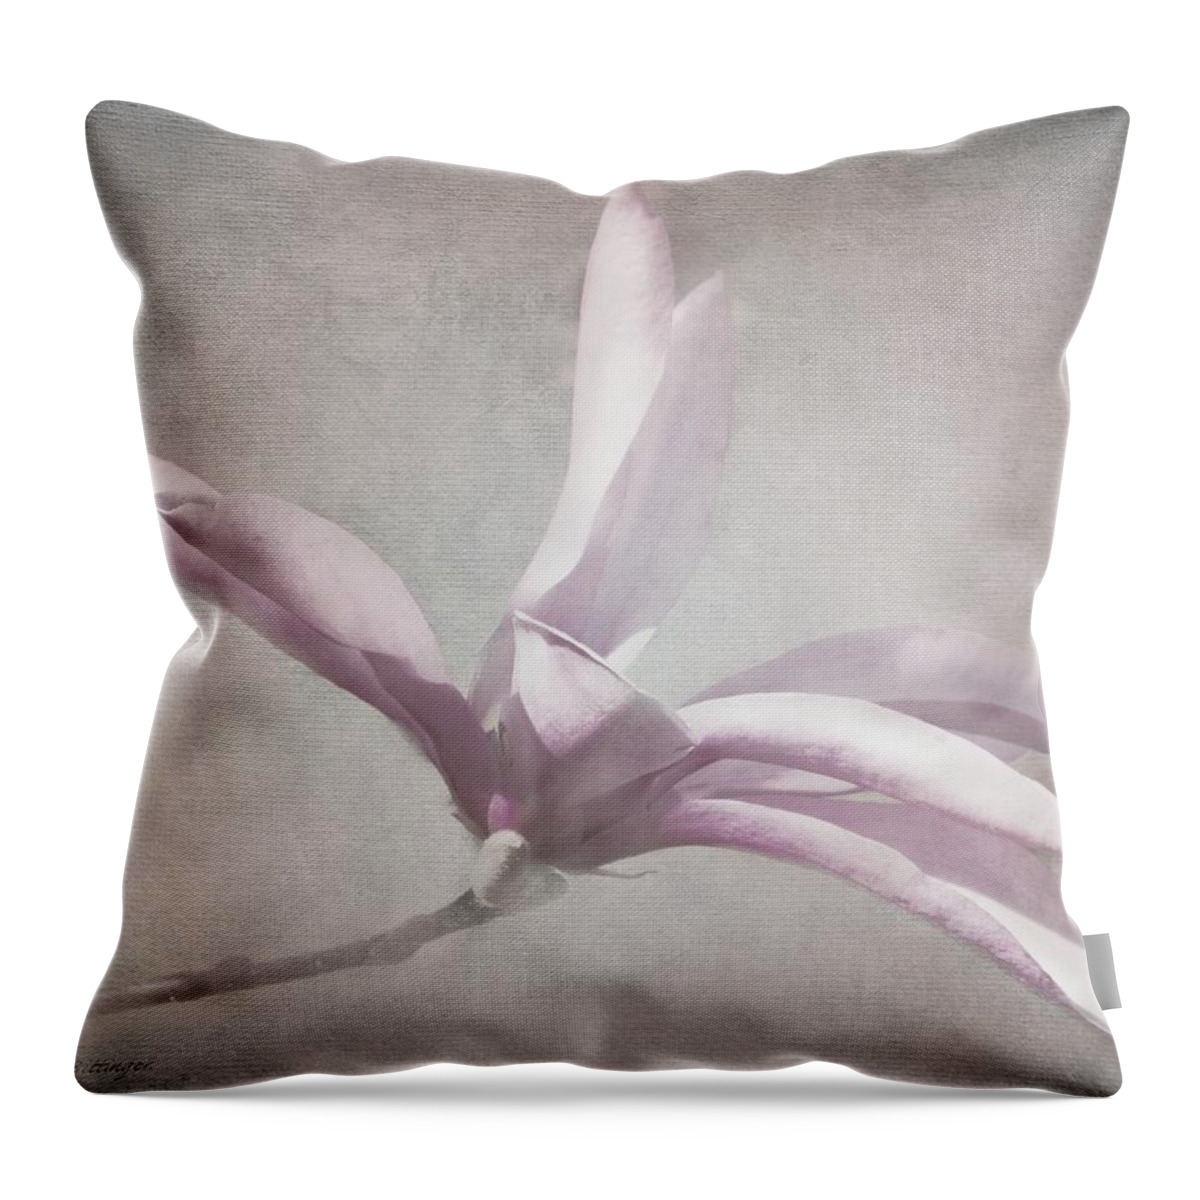 Pink Tulip Magnolia Throw Pillow featuring the photograph Whisper Tulip Magnolia by Melissa Bittinger